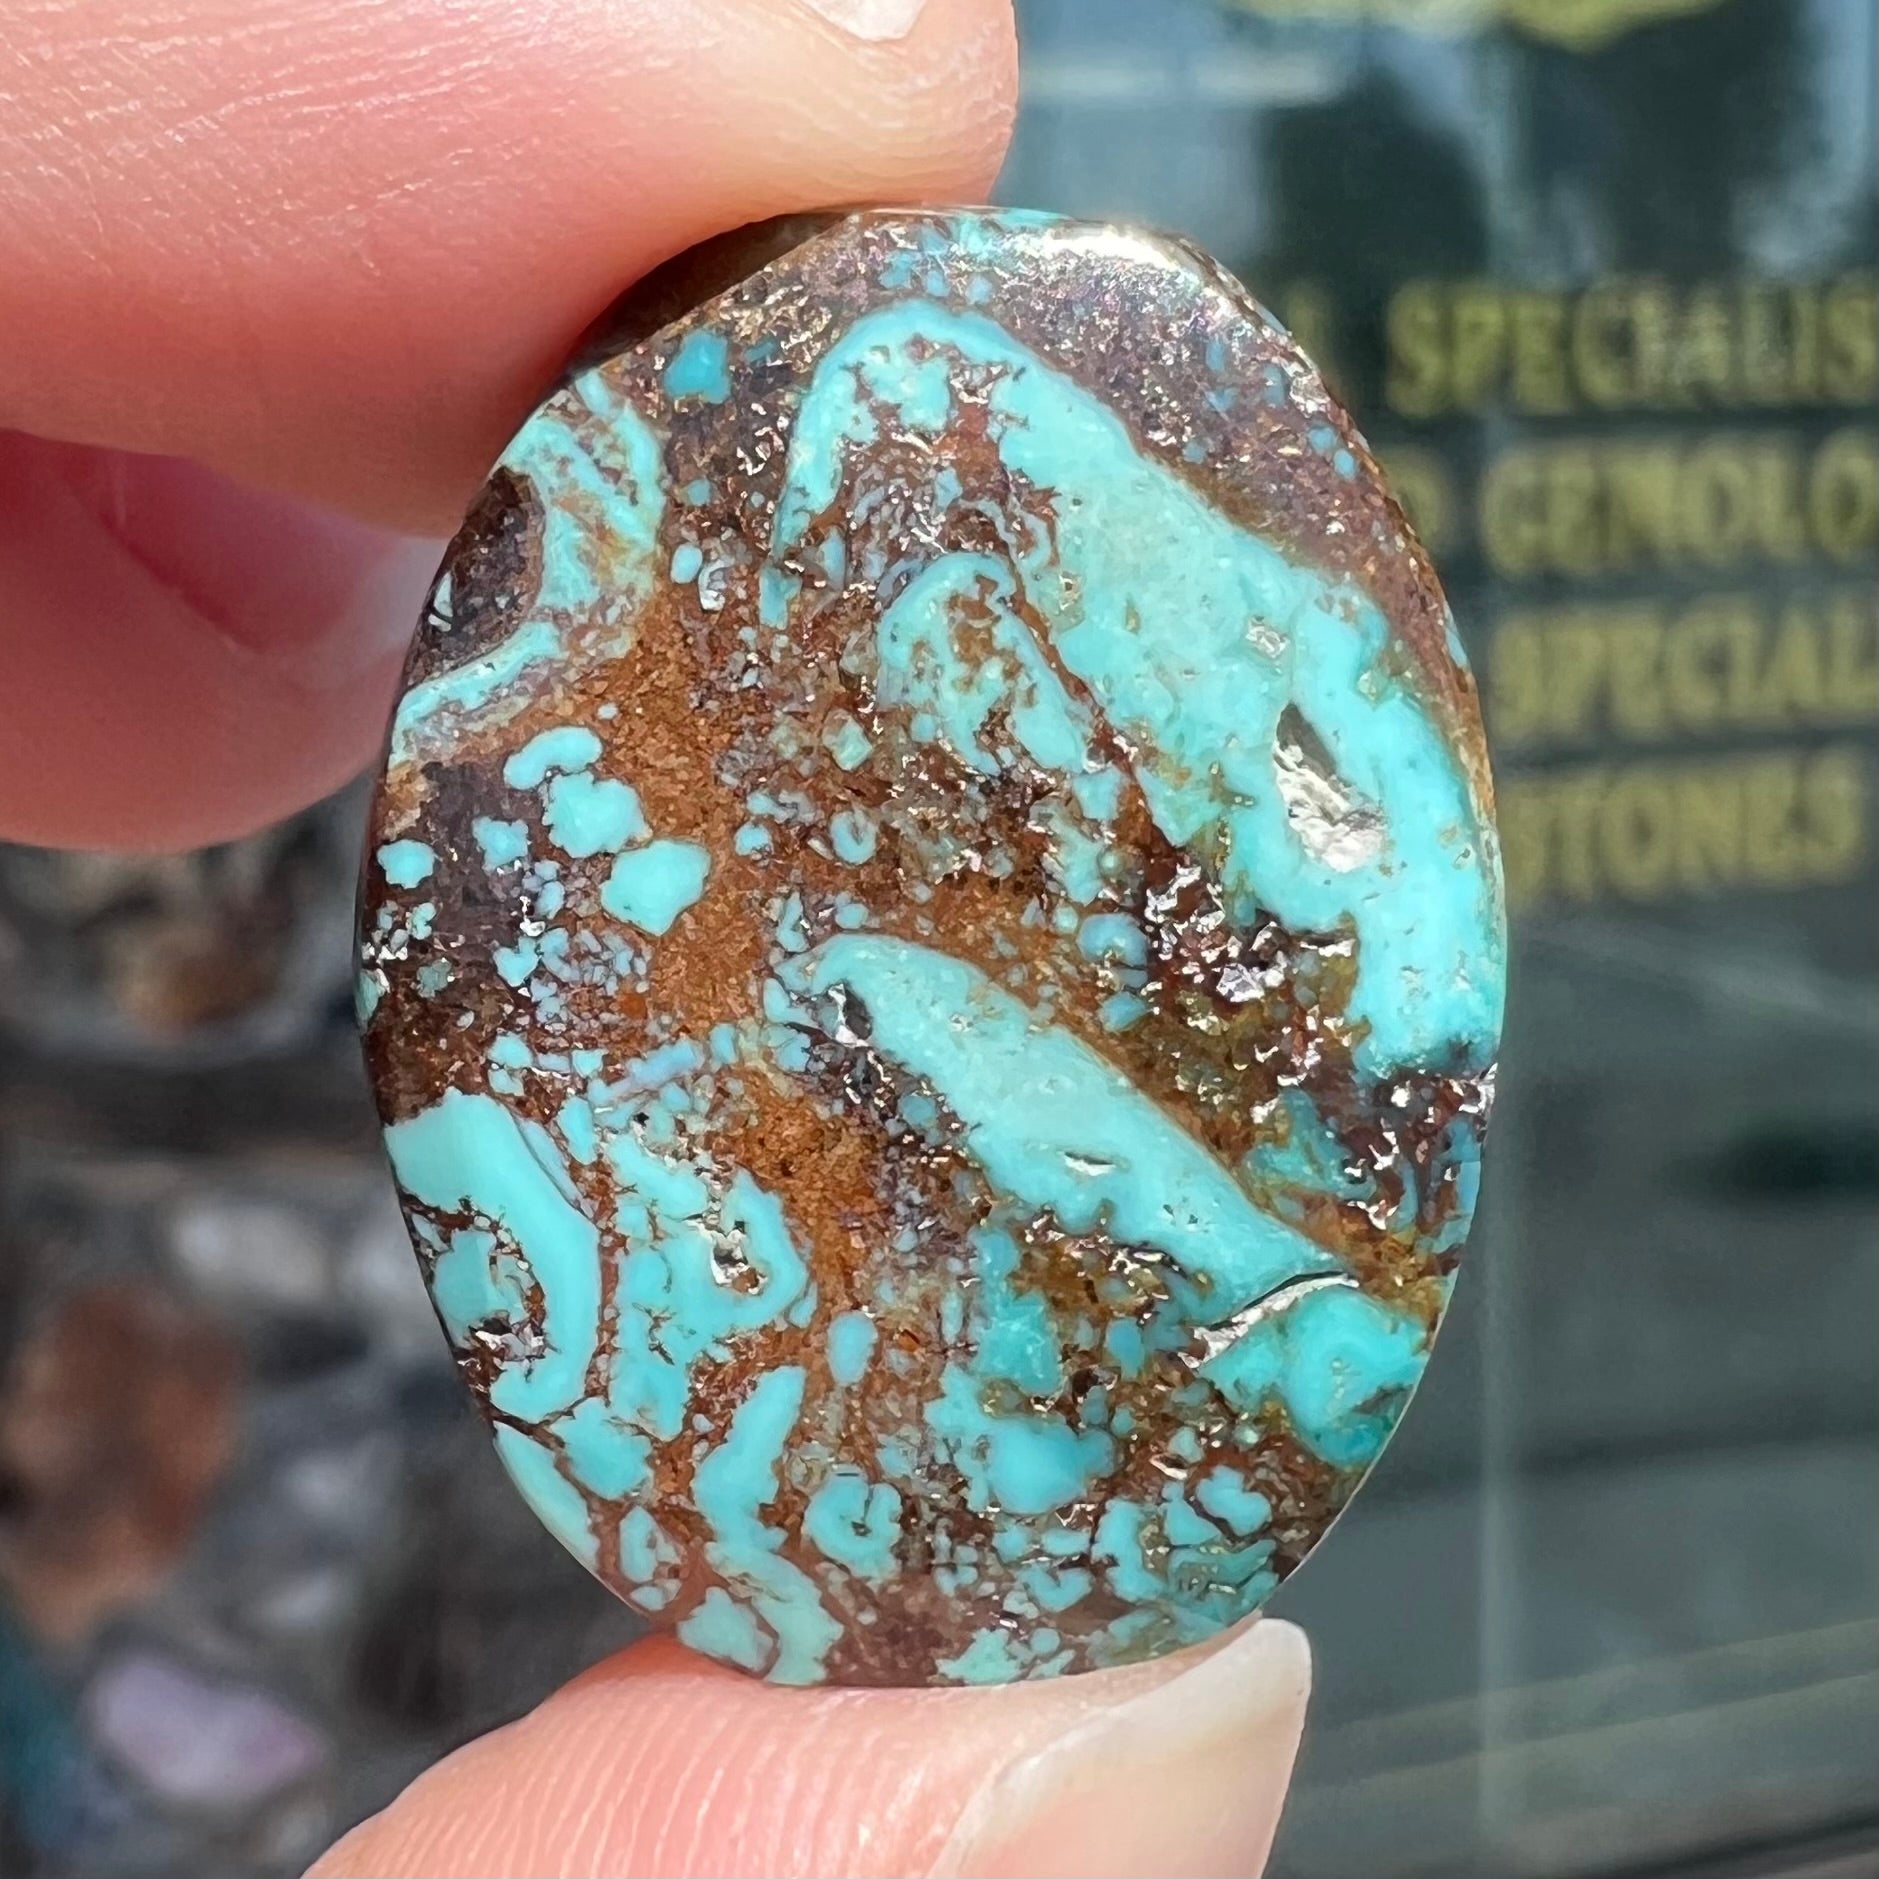 A loose, barrel cabochon cut turquoise stone from Royston District, Nevada.  The stone is greenish blue with brown and black matrix.